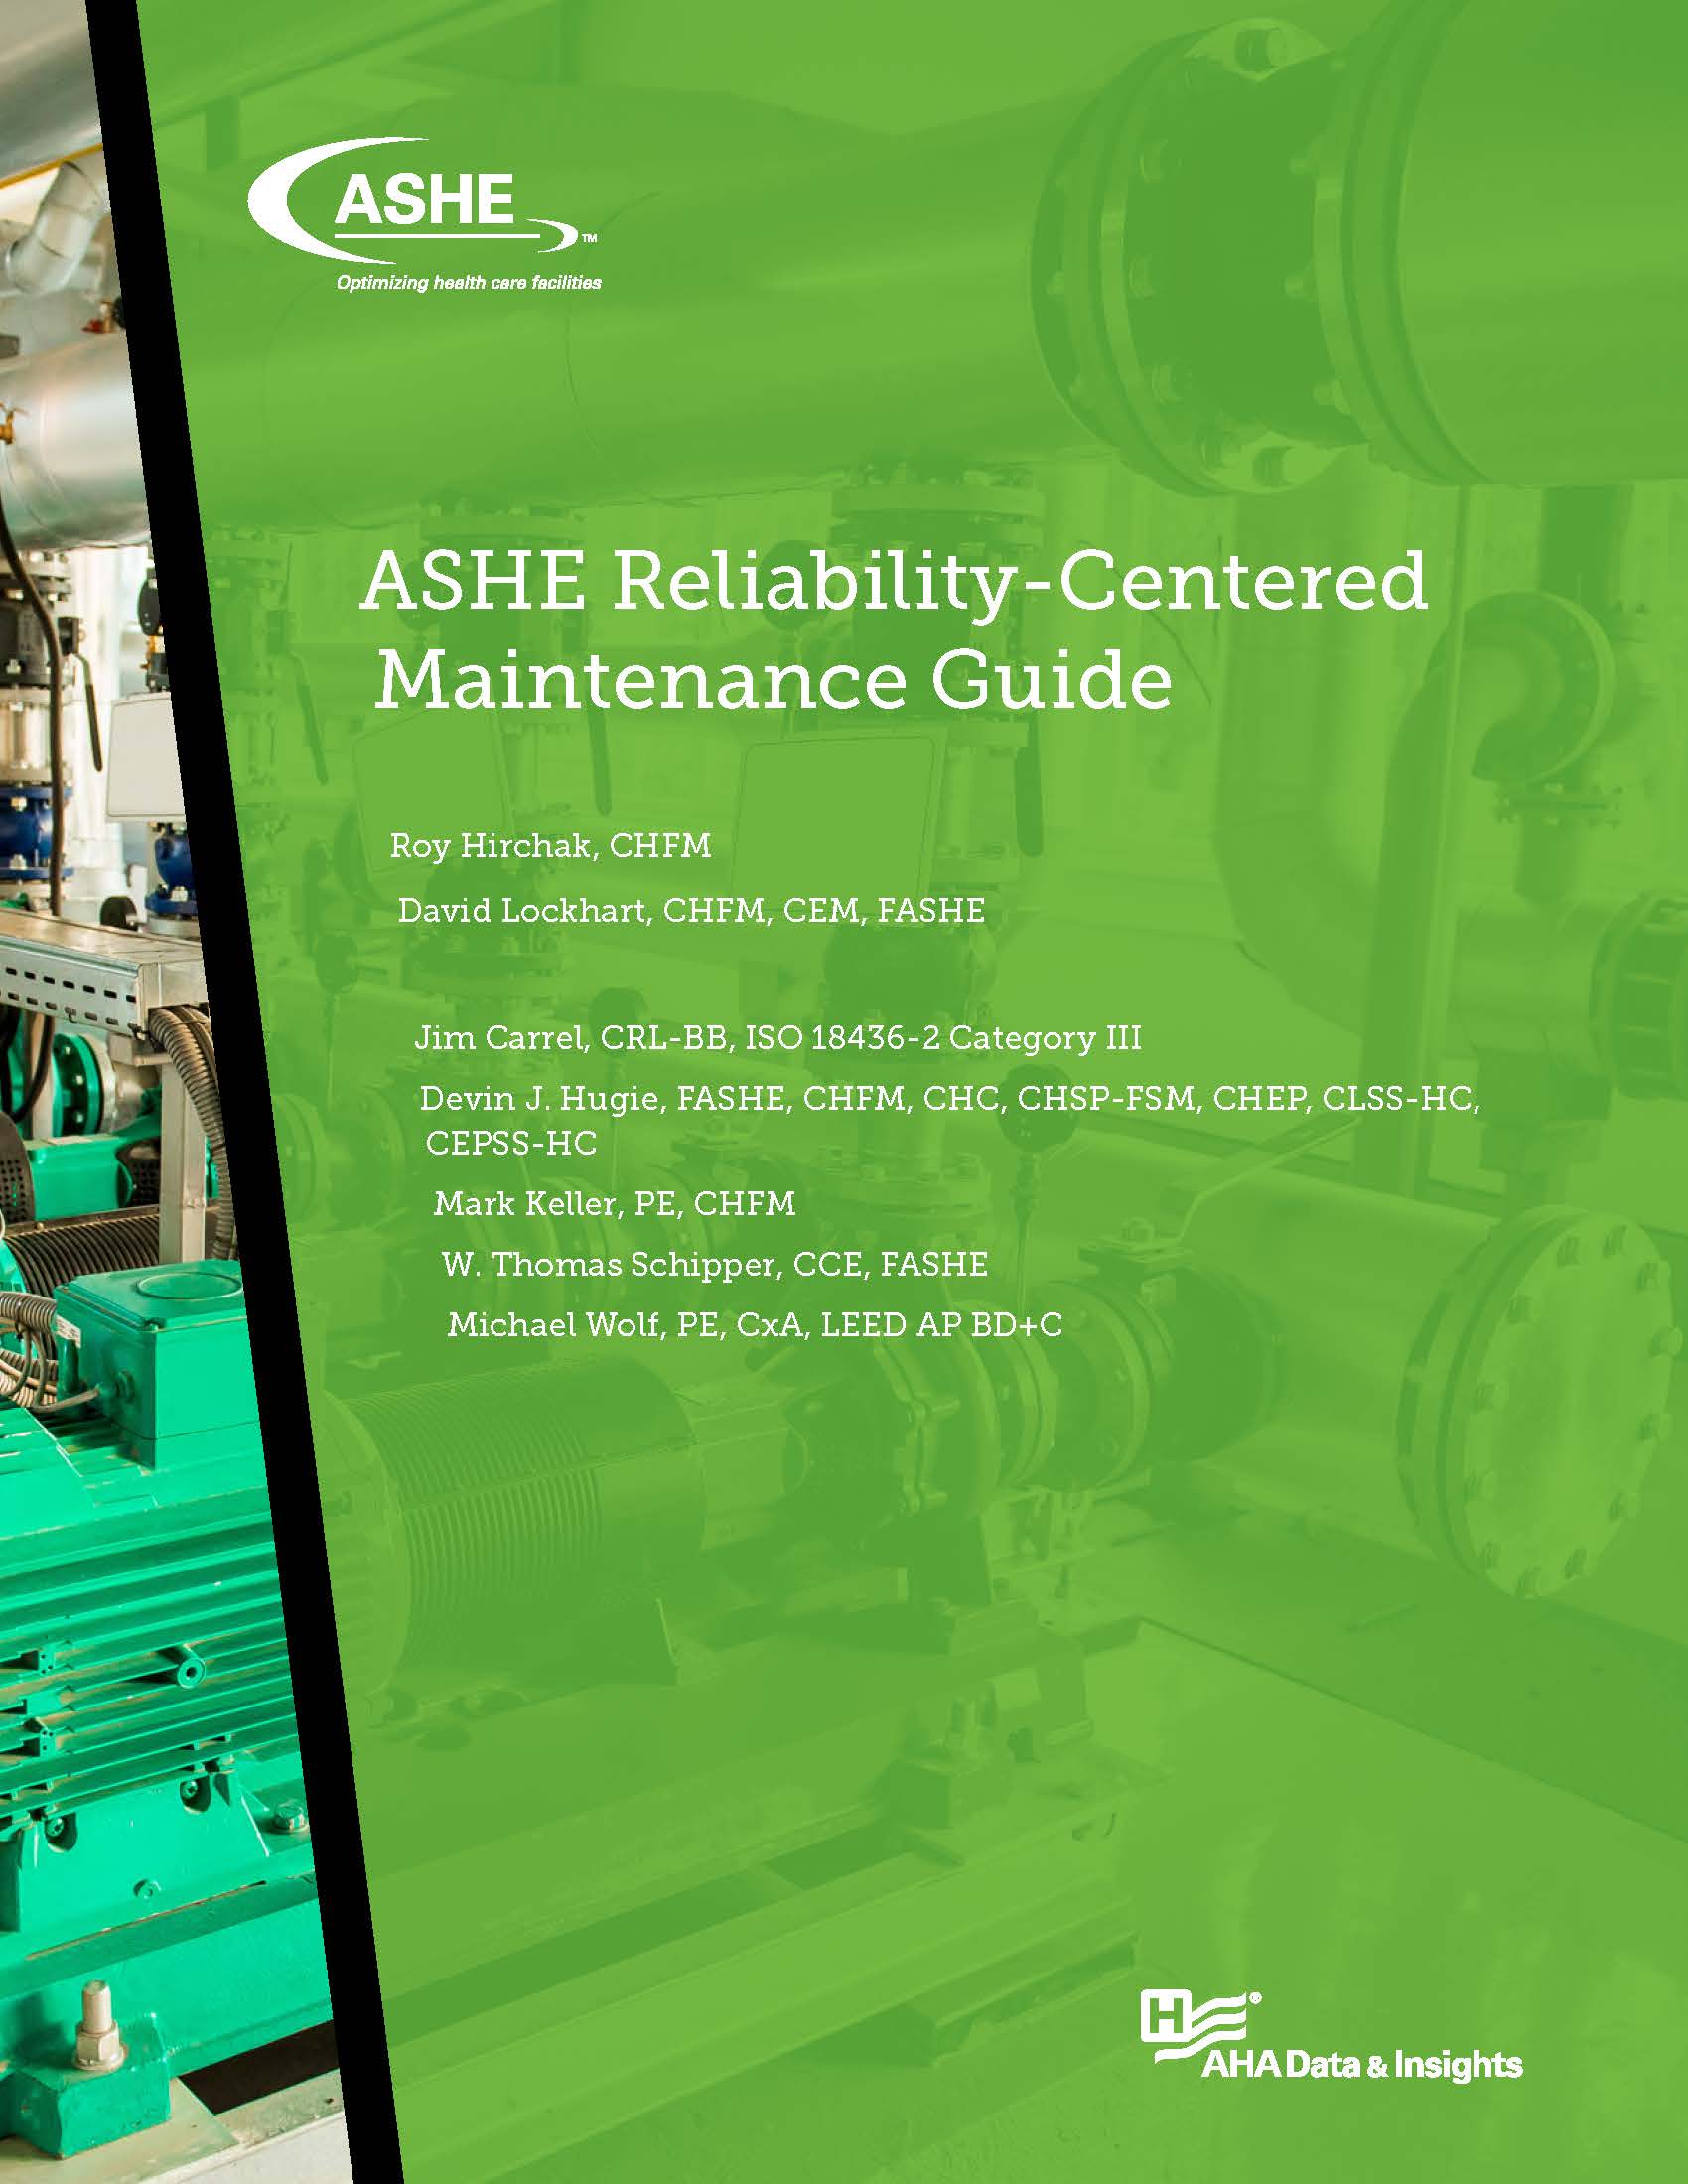 ASHE Reliability-Centered Maintenance Guide - Print Edition